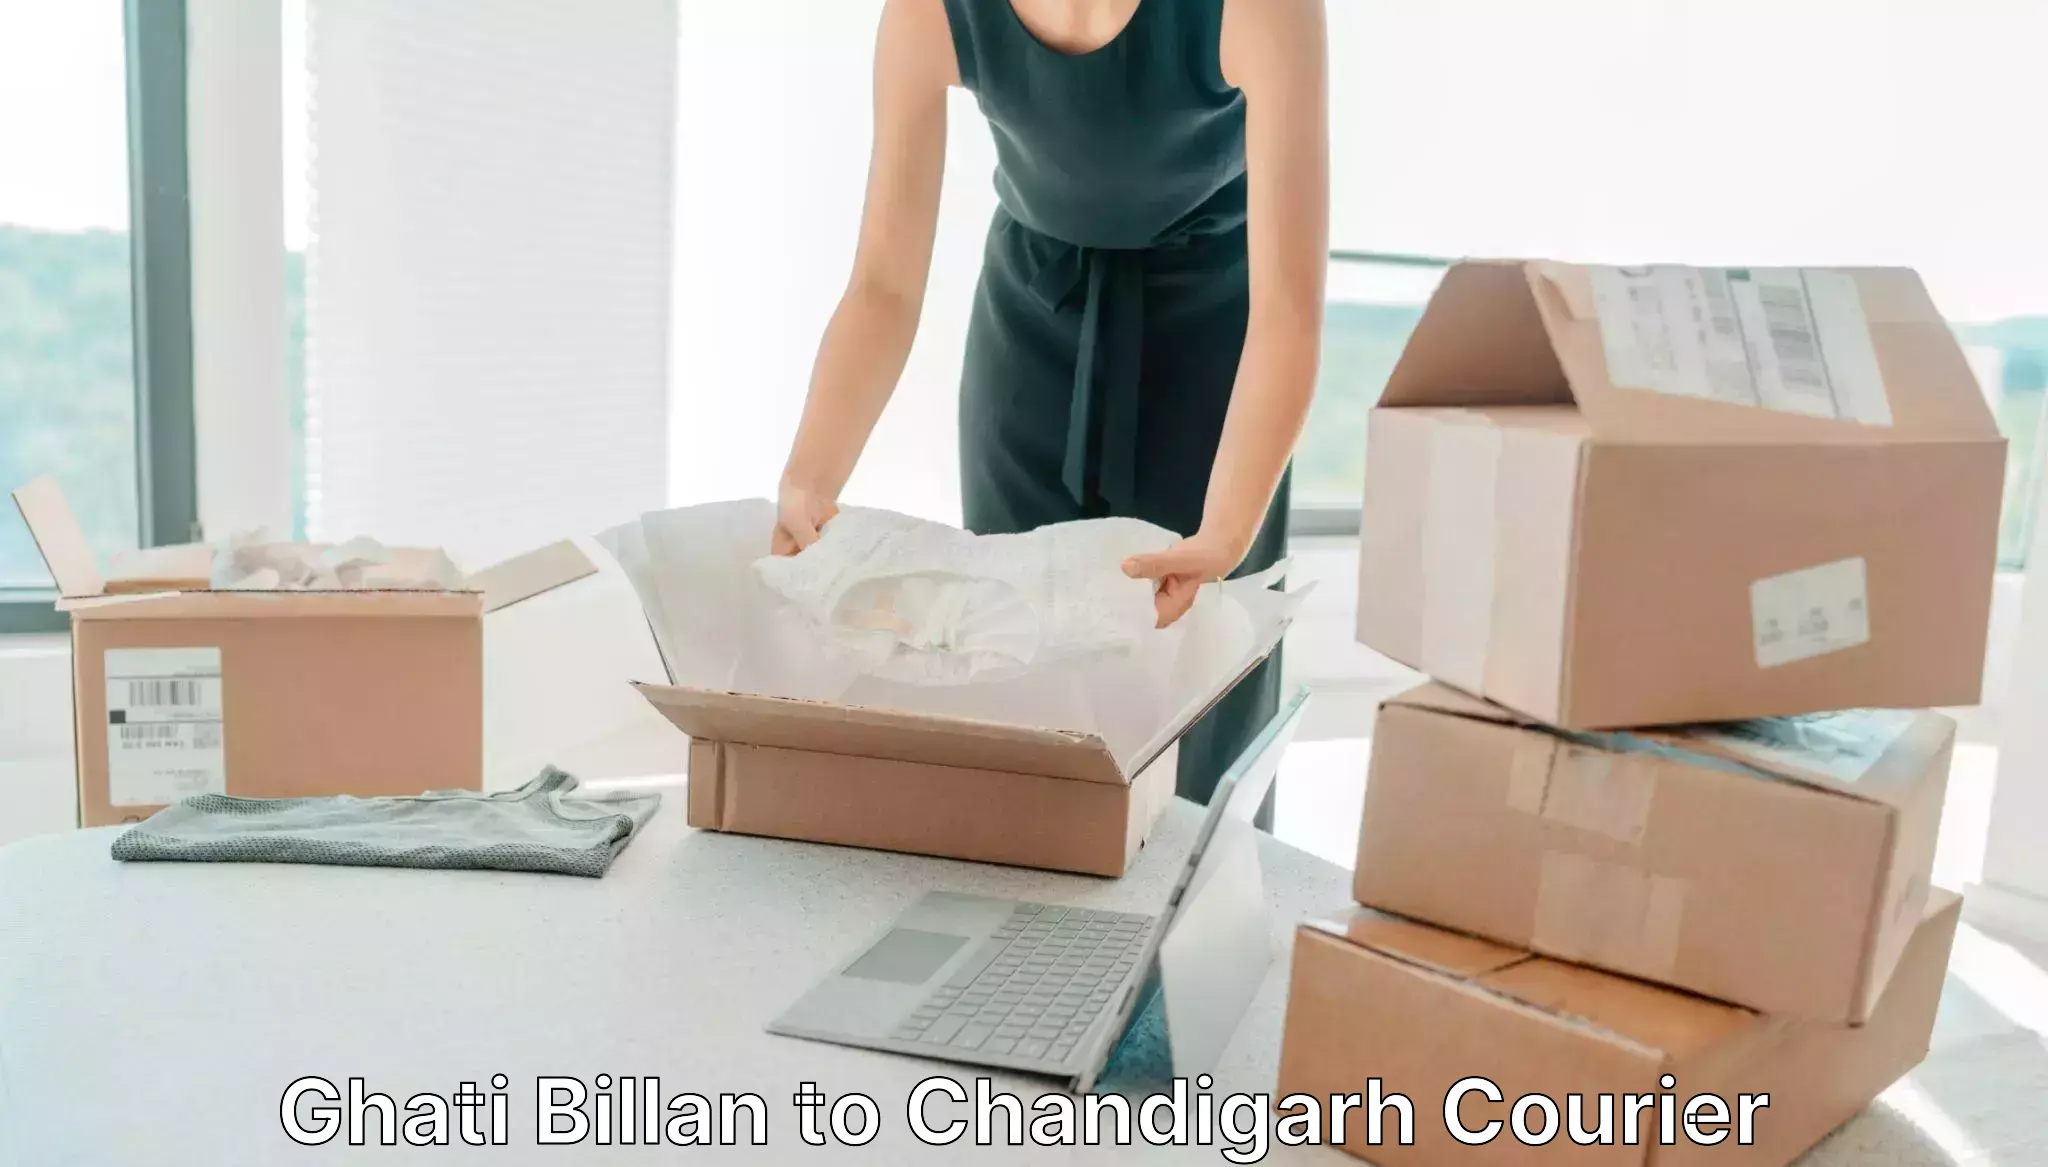 Reliable delivery network Ghati Billan to Panjab University Chandigarh